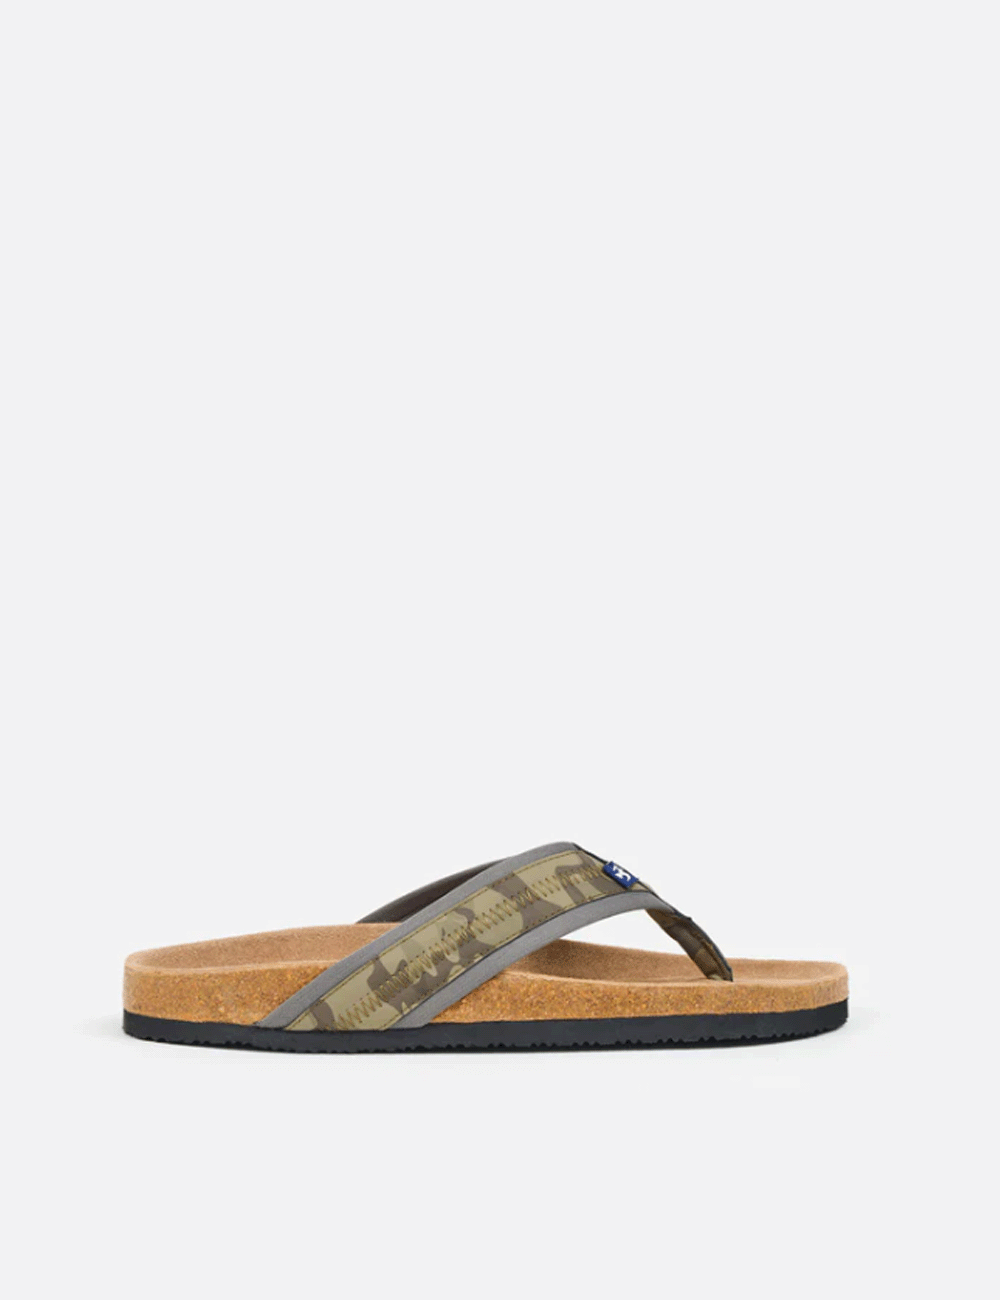 Outside of right foot of the Camo Flip Flops